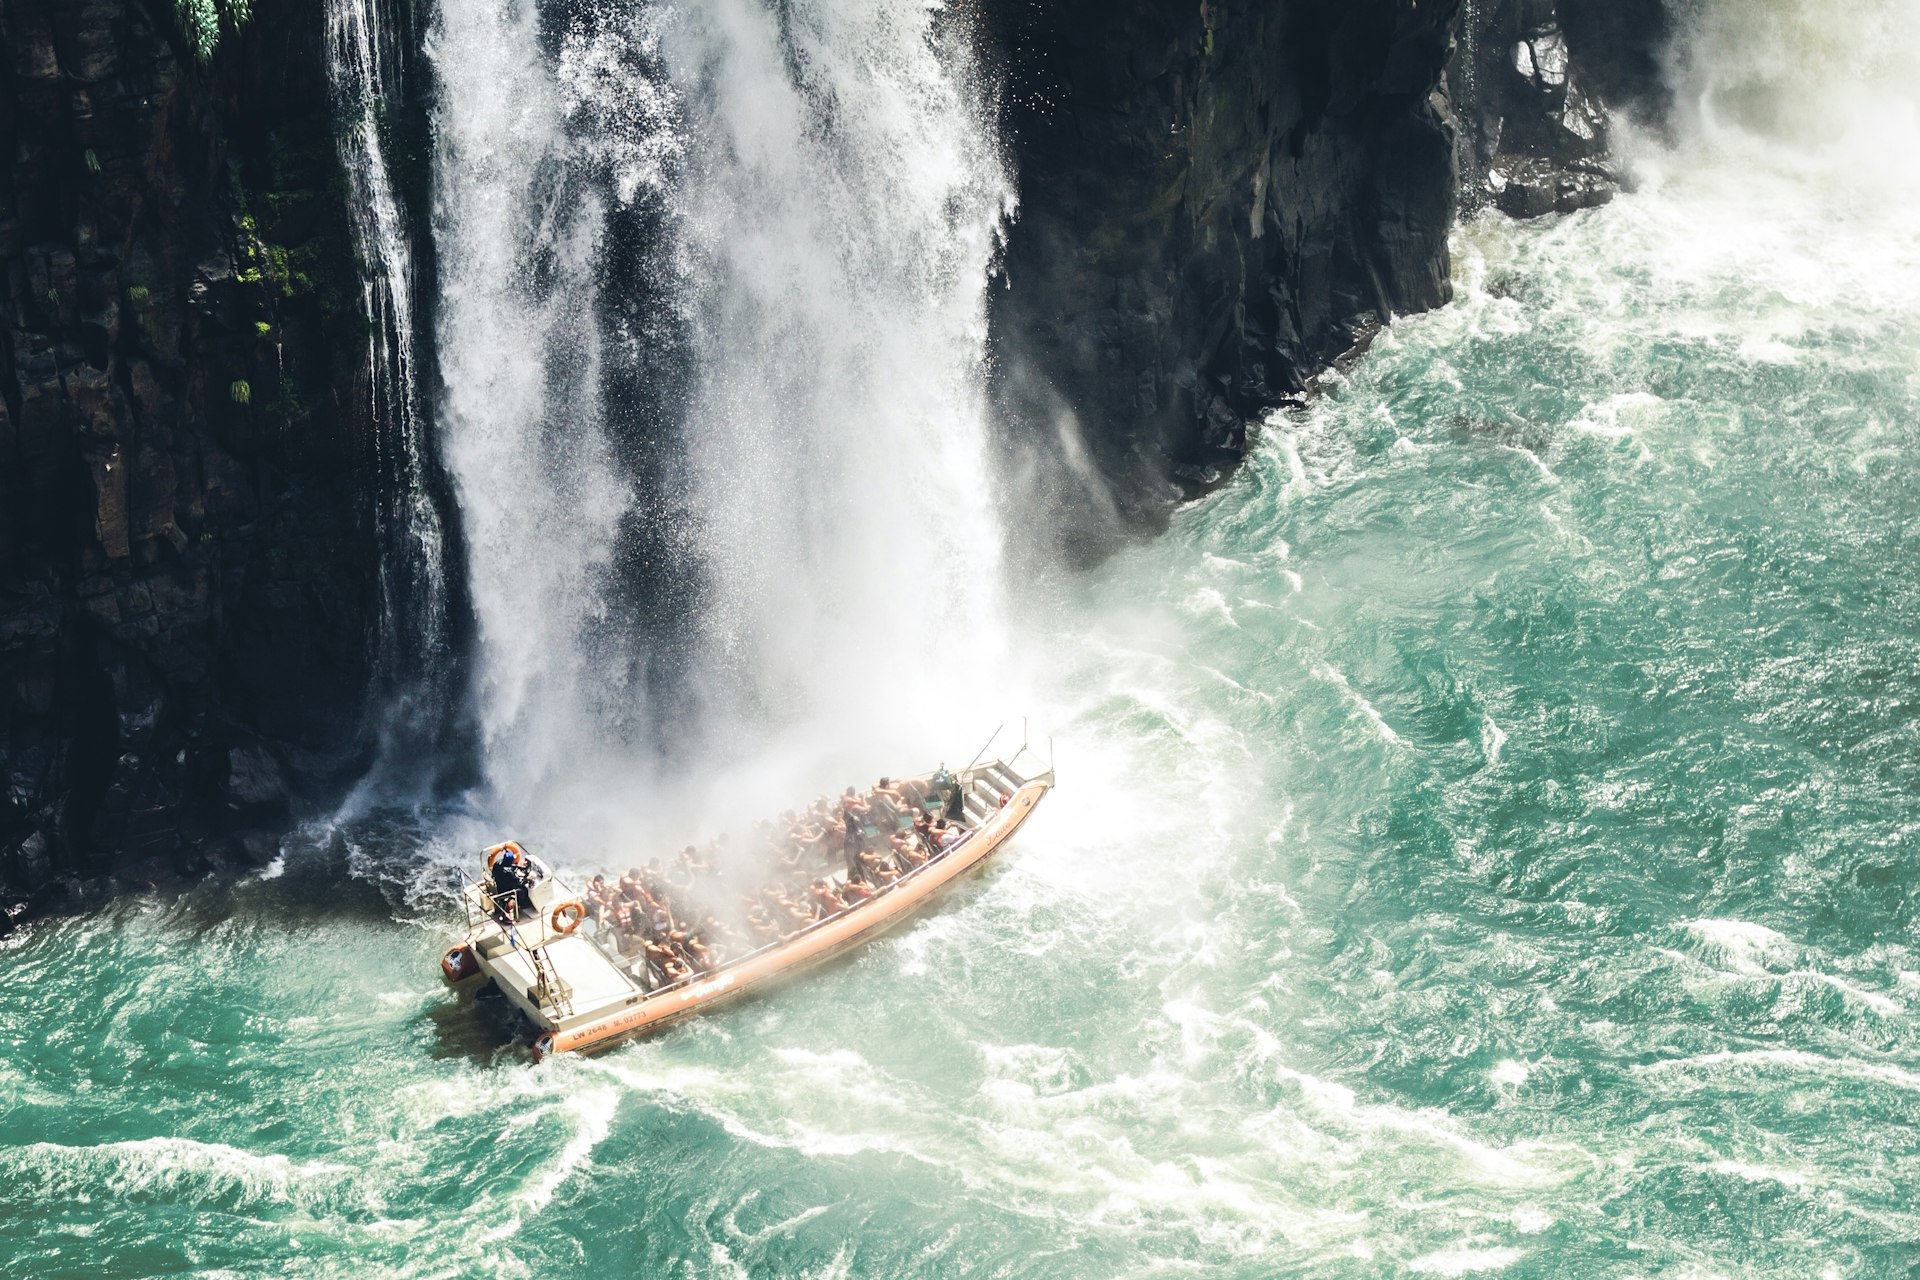 A speedboat with tourists travels under one of the many cataracts at Iguaçu Falls